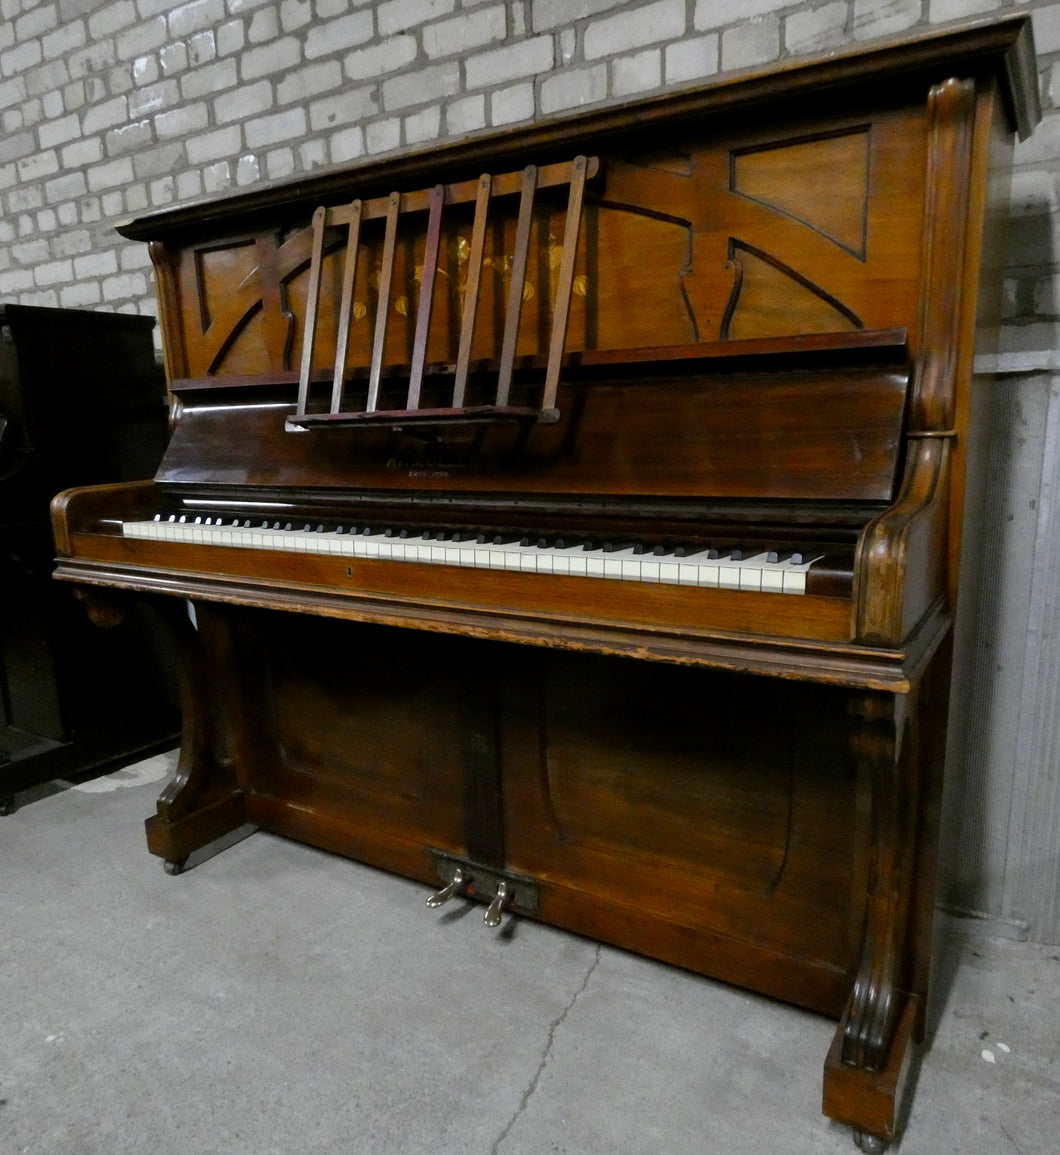 Ritmüller Upright Piano in Ornate Rosewood Cabinetry With Decorative Inlay